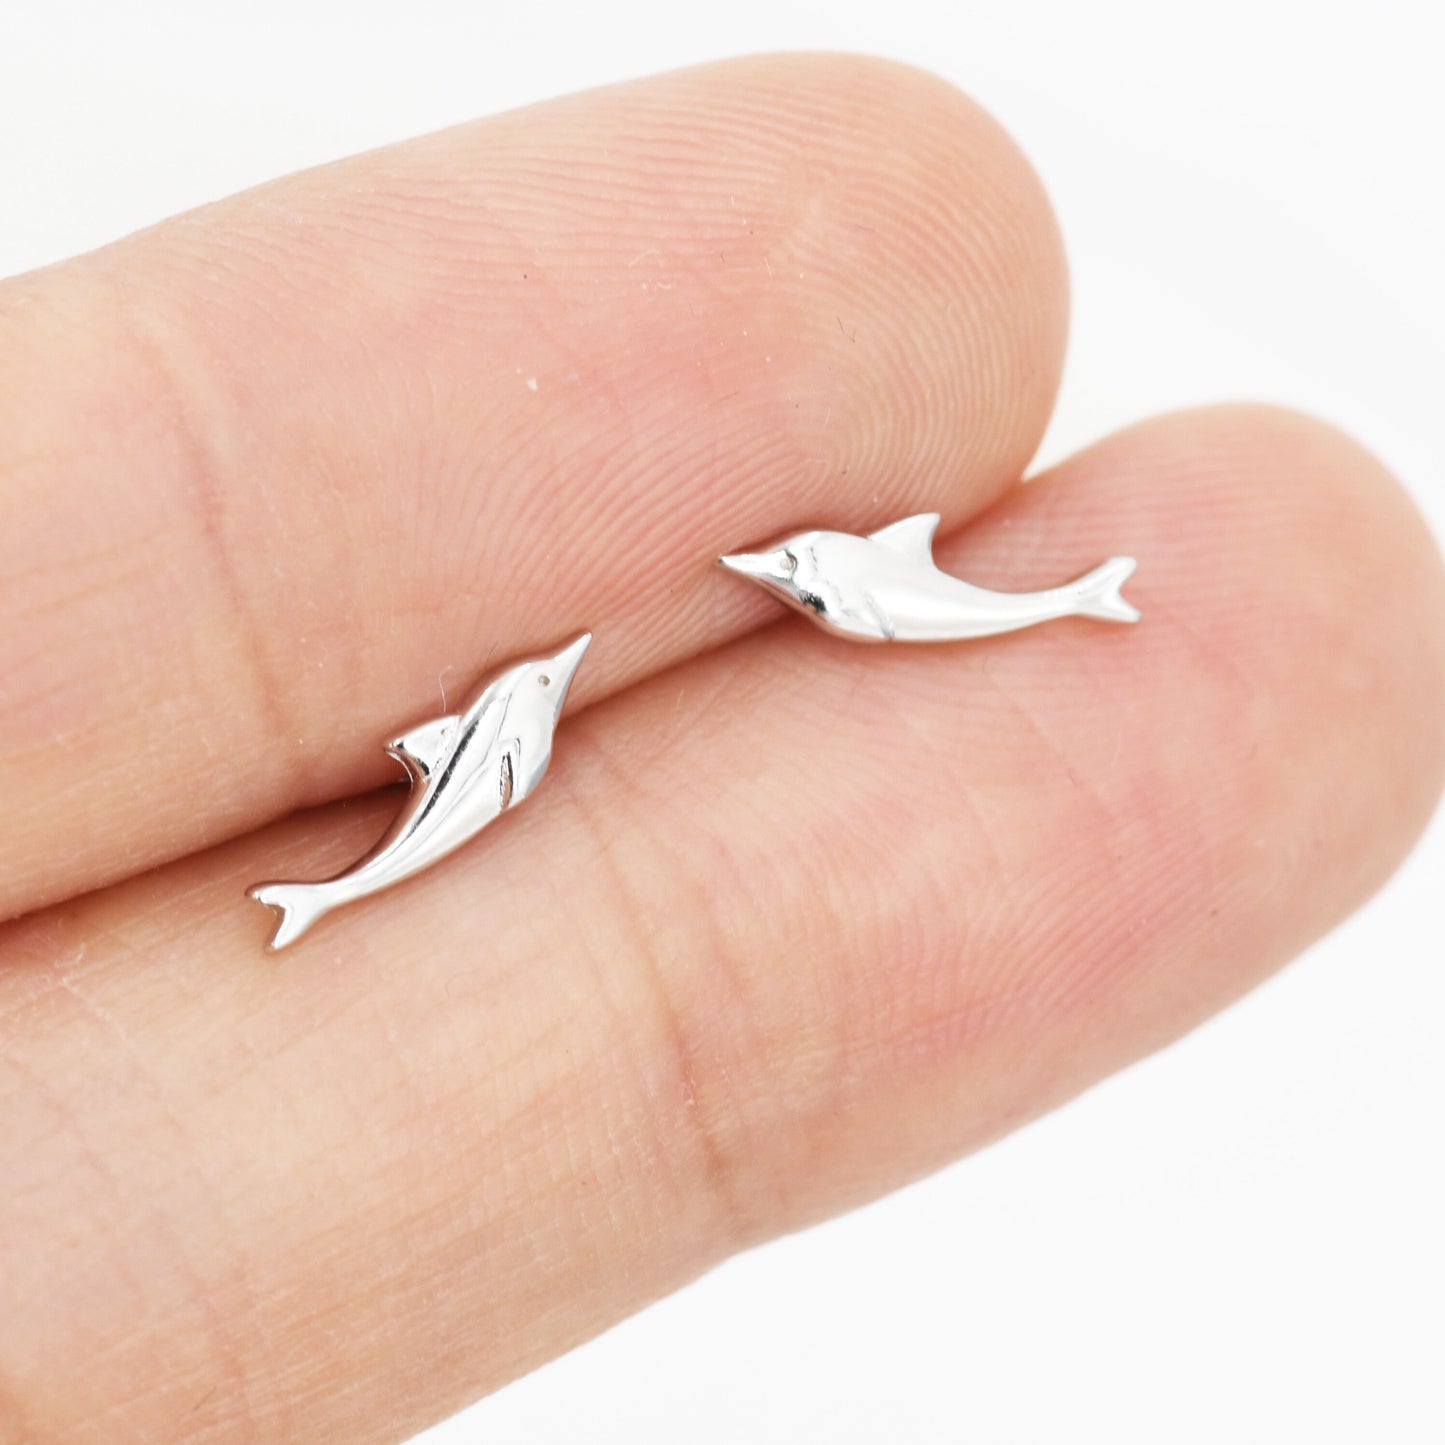 Extra Tiny Dolphin Fish Stud Earrings in Sterling Silver, Dolphin Earrings,  Nature Inspired Animal Earrings